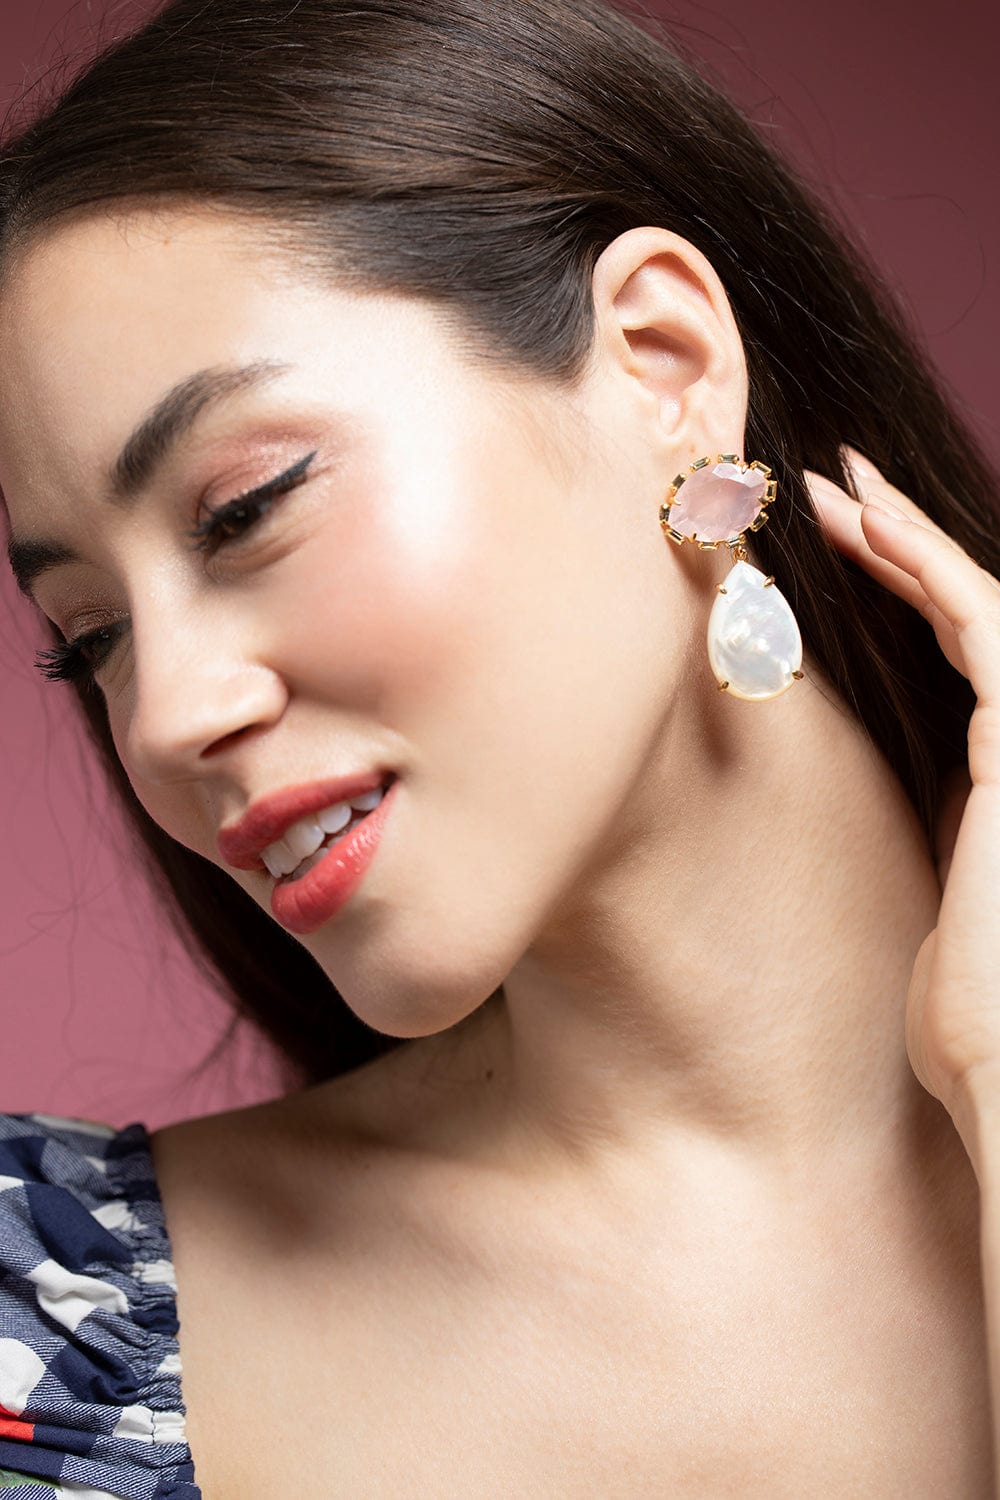 BOUNKIT JEWELRY-Rose Quarz and Mother of Pearl Drop Earrings-GOLD